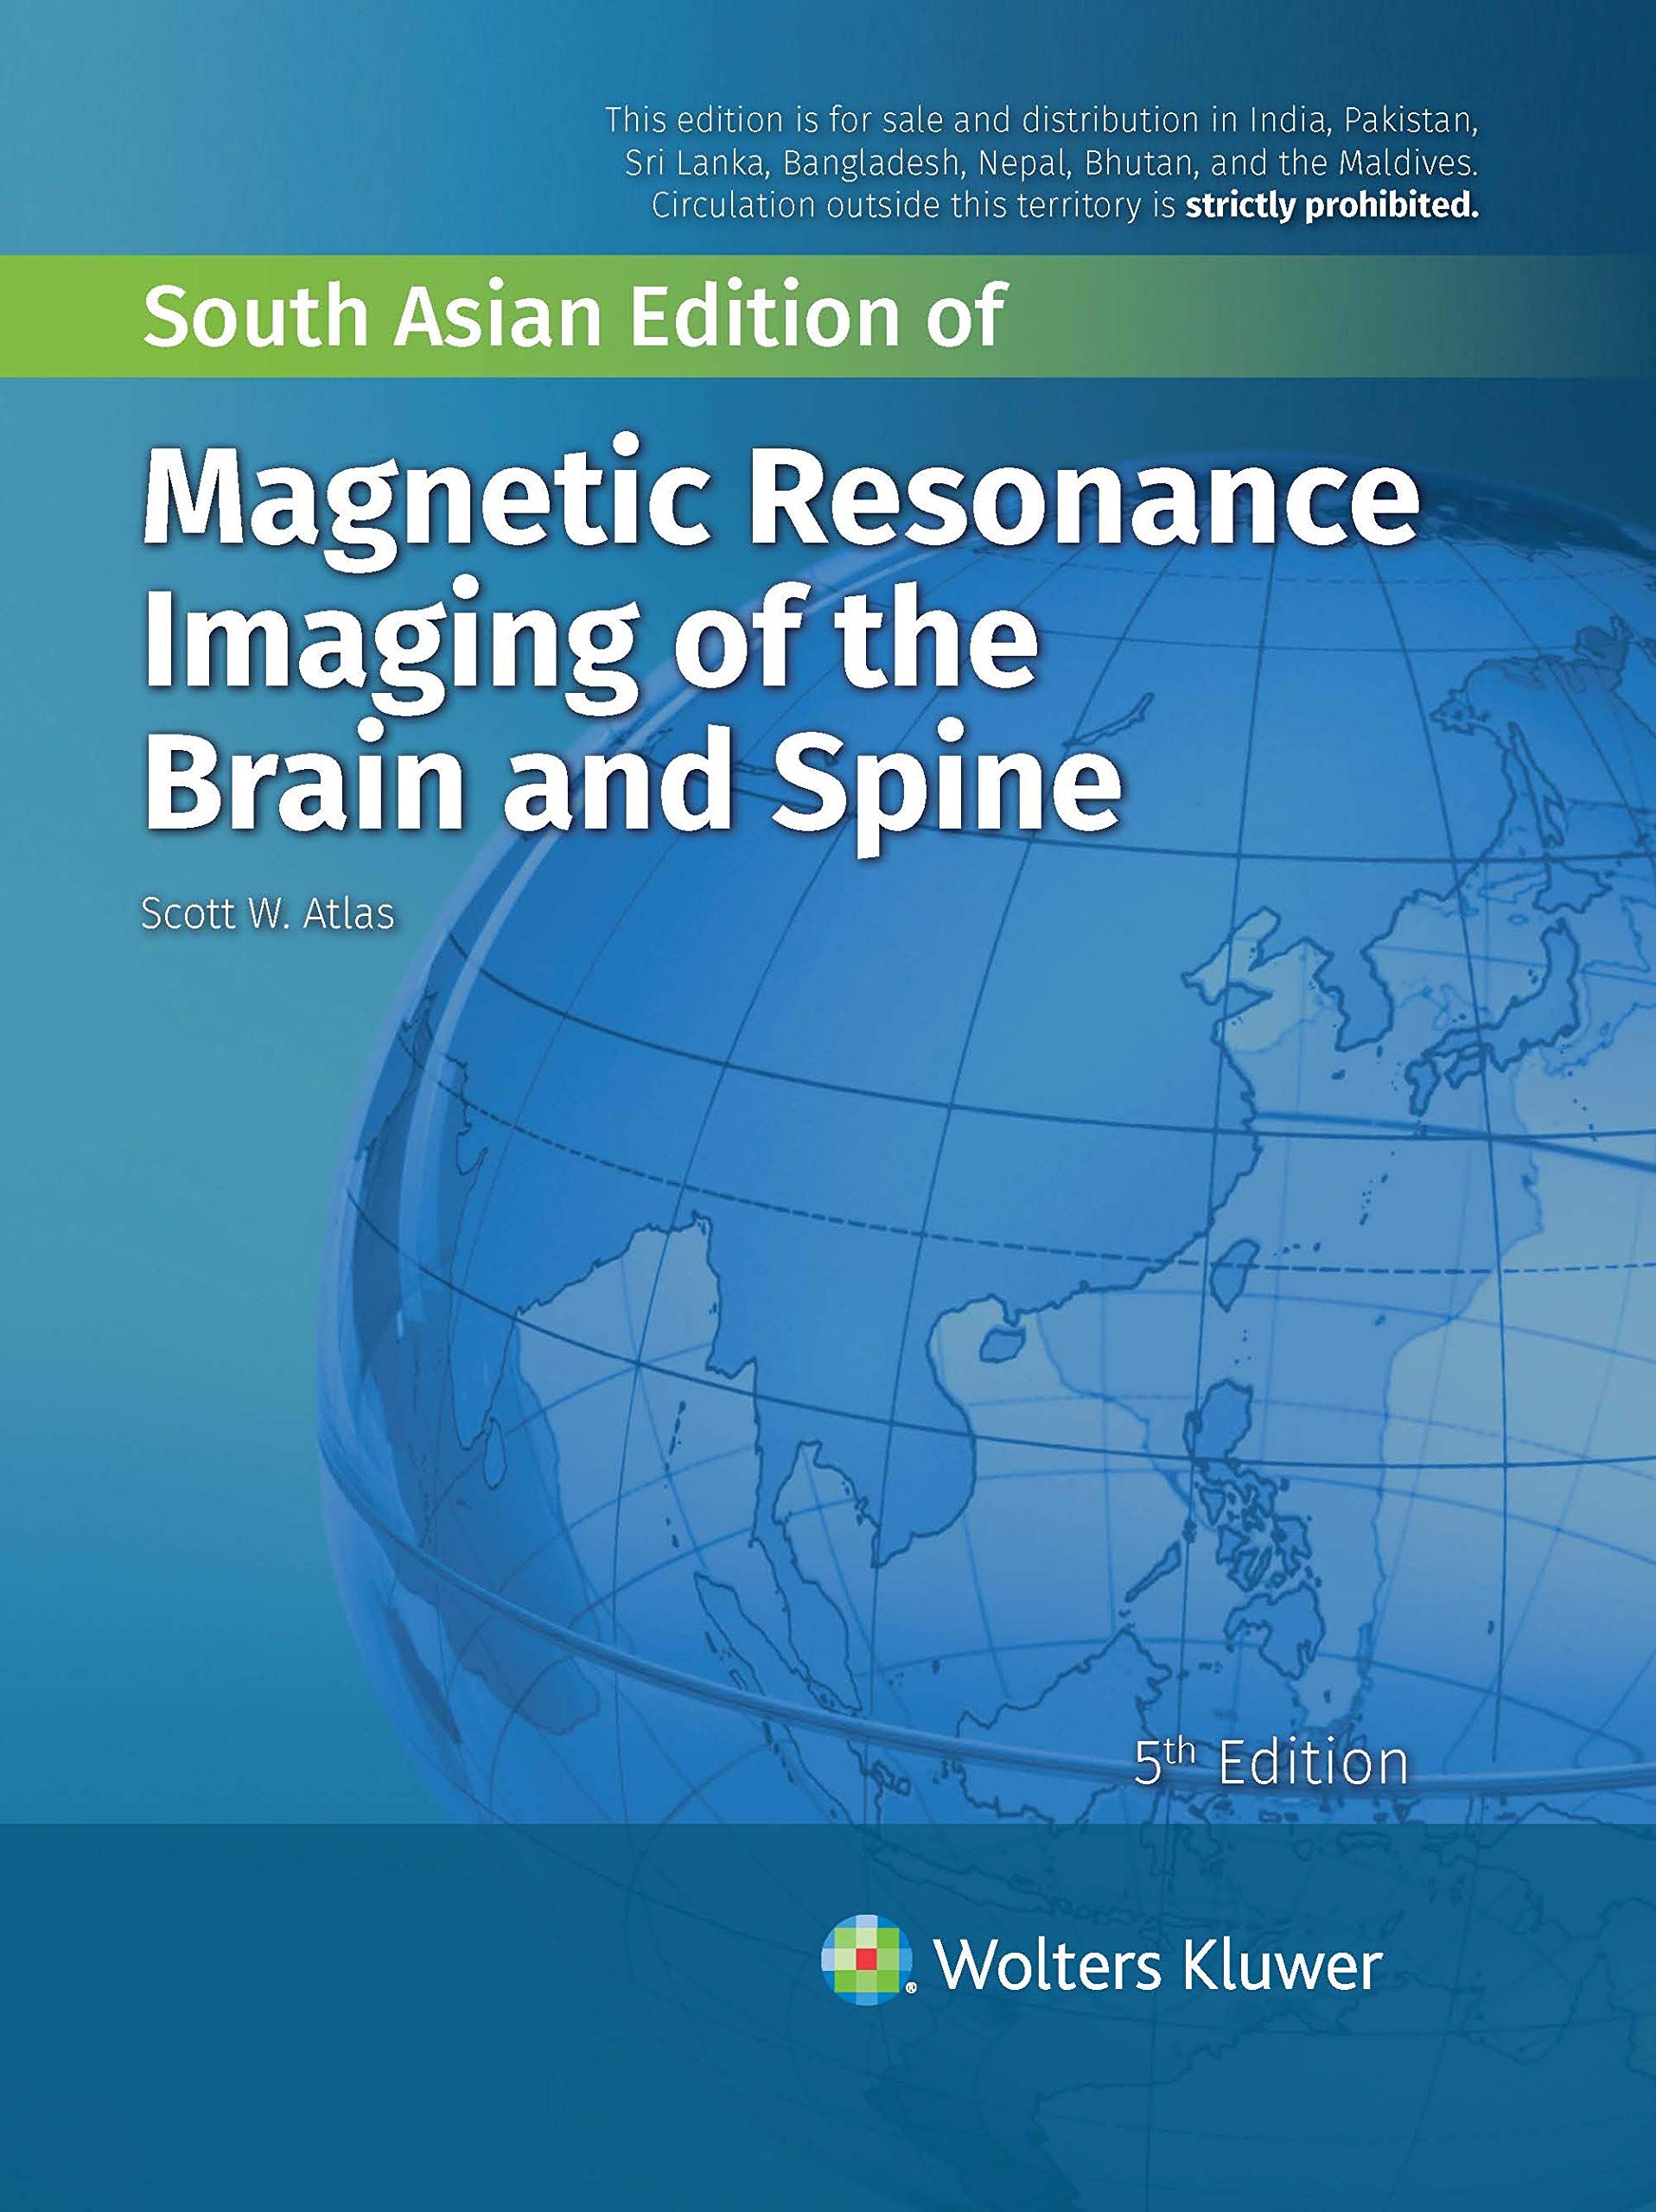 
exclusive-publishers//magnetic-resonance-imaging-of-the-brain-and-spine-5th-south-asian-edition--9789390612178